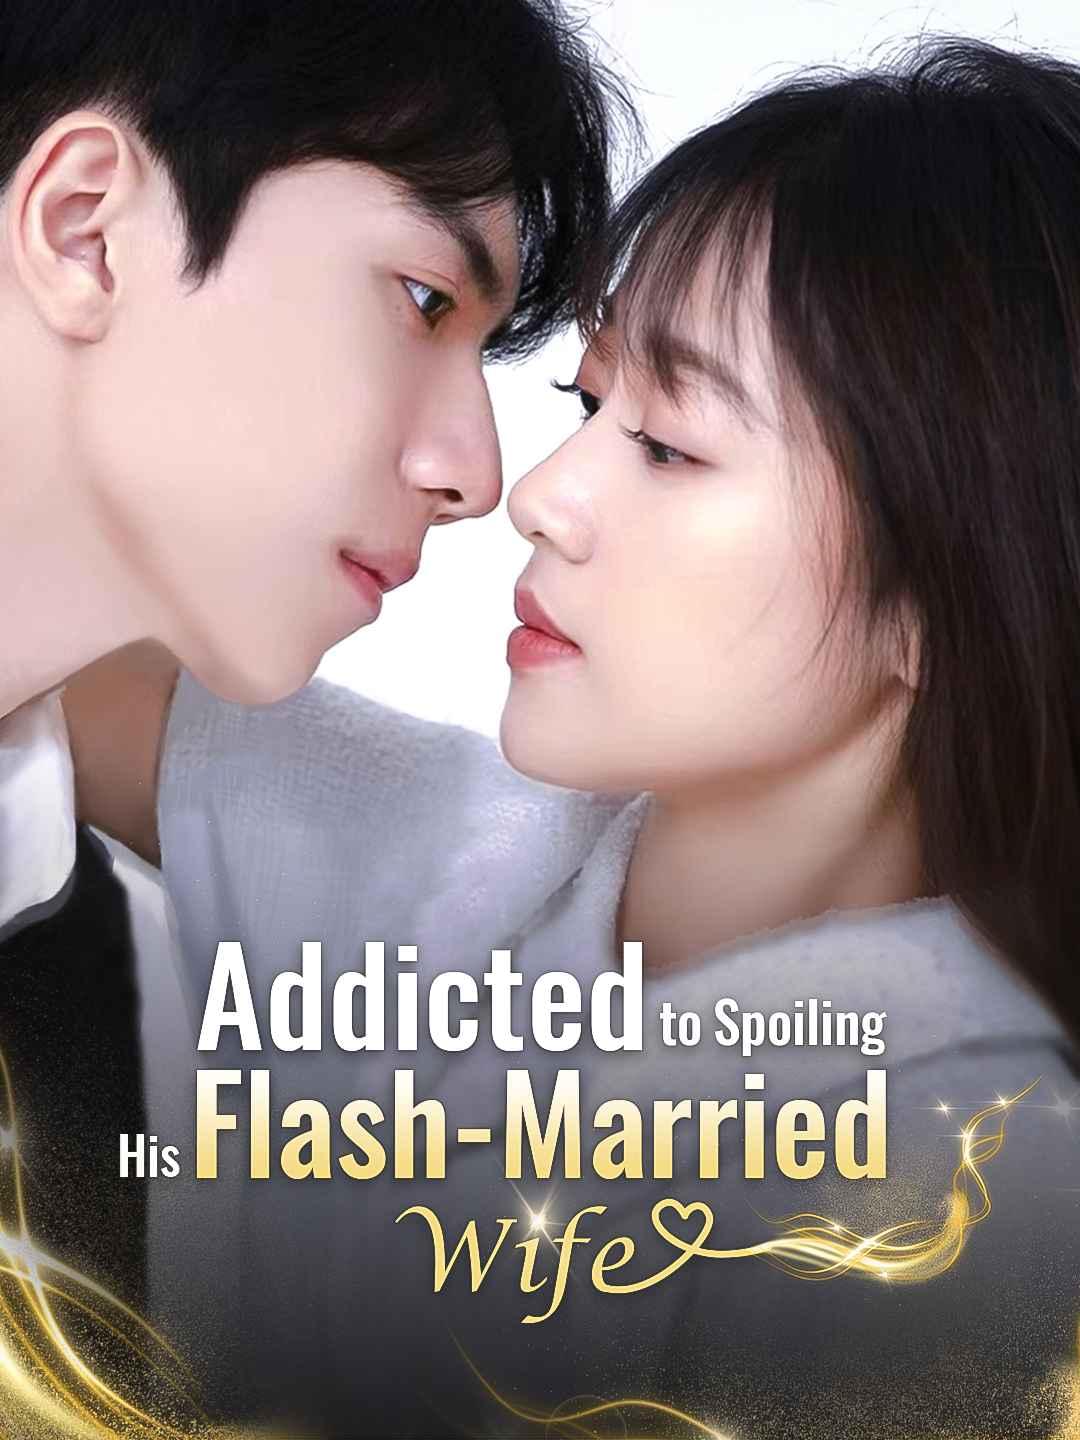 Addicted to Spoiling His Flash-Married Wife